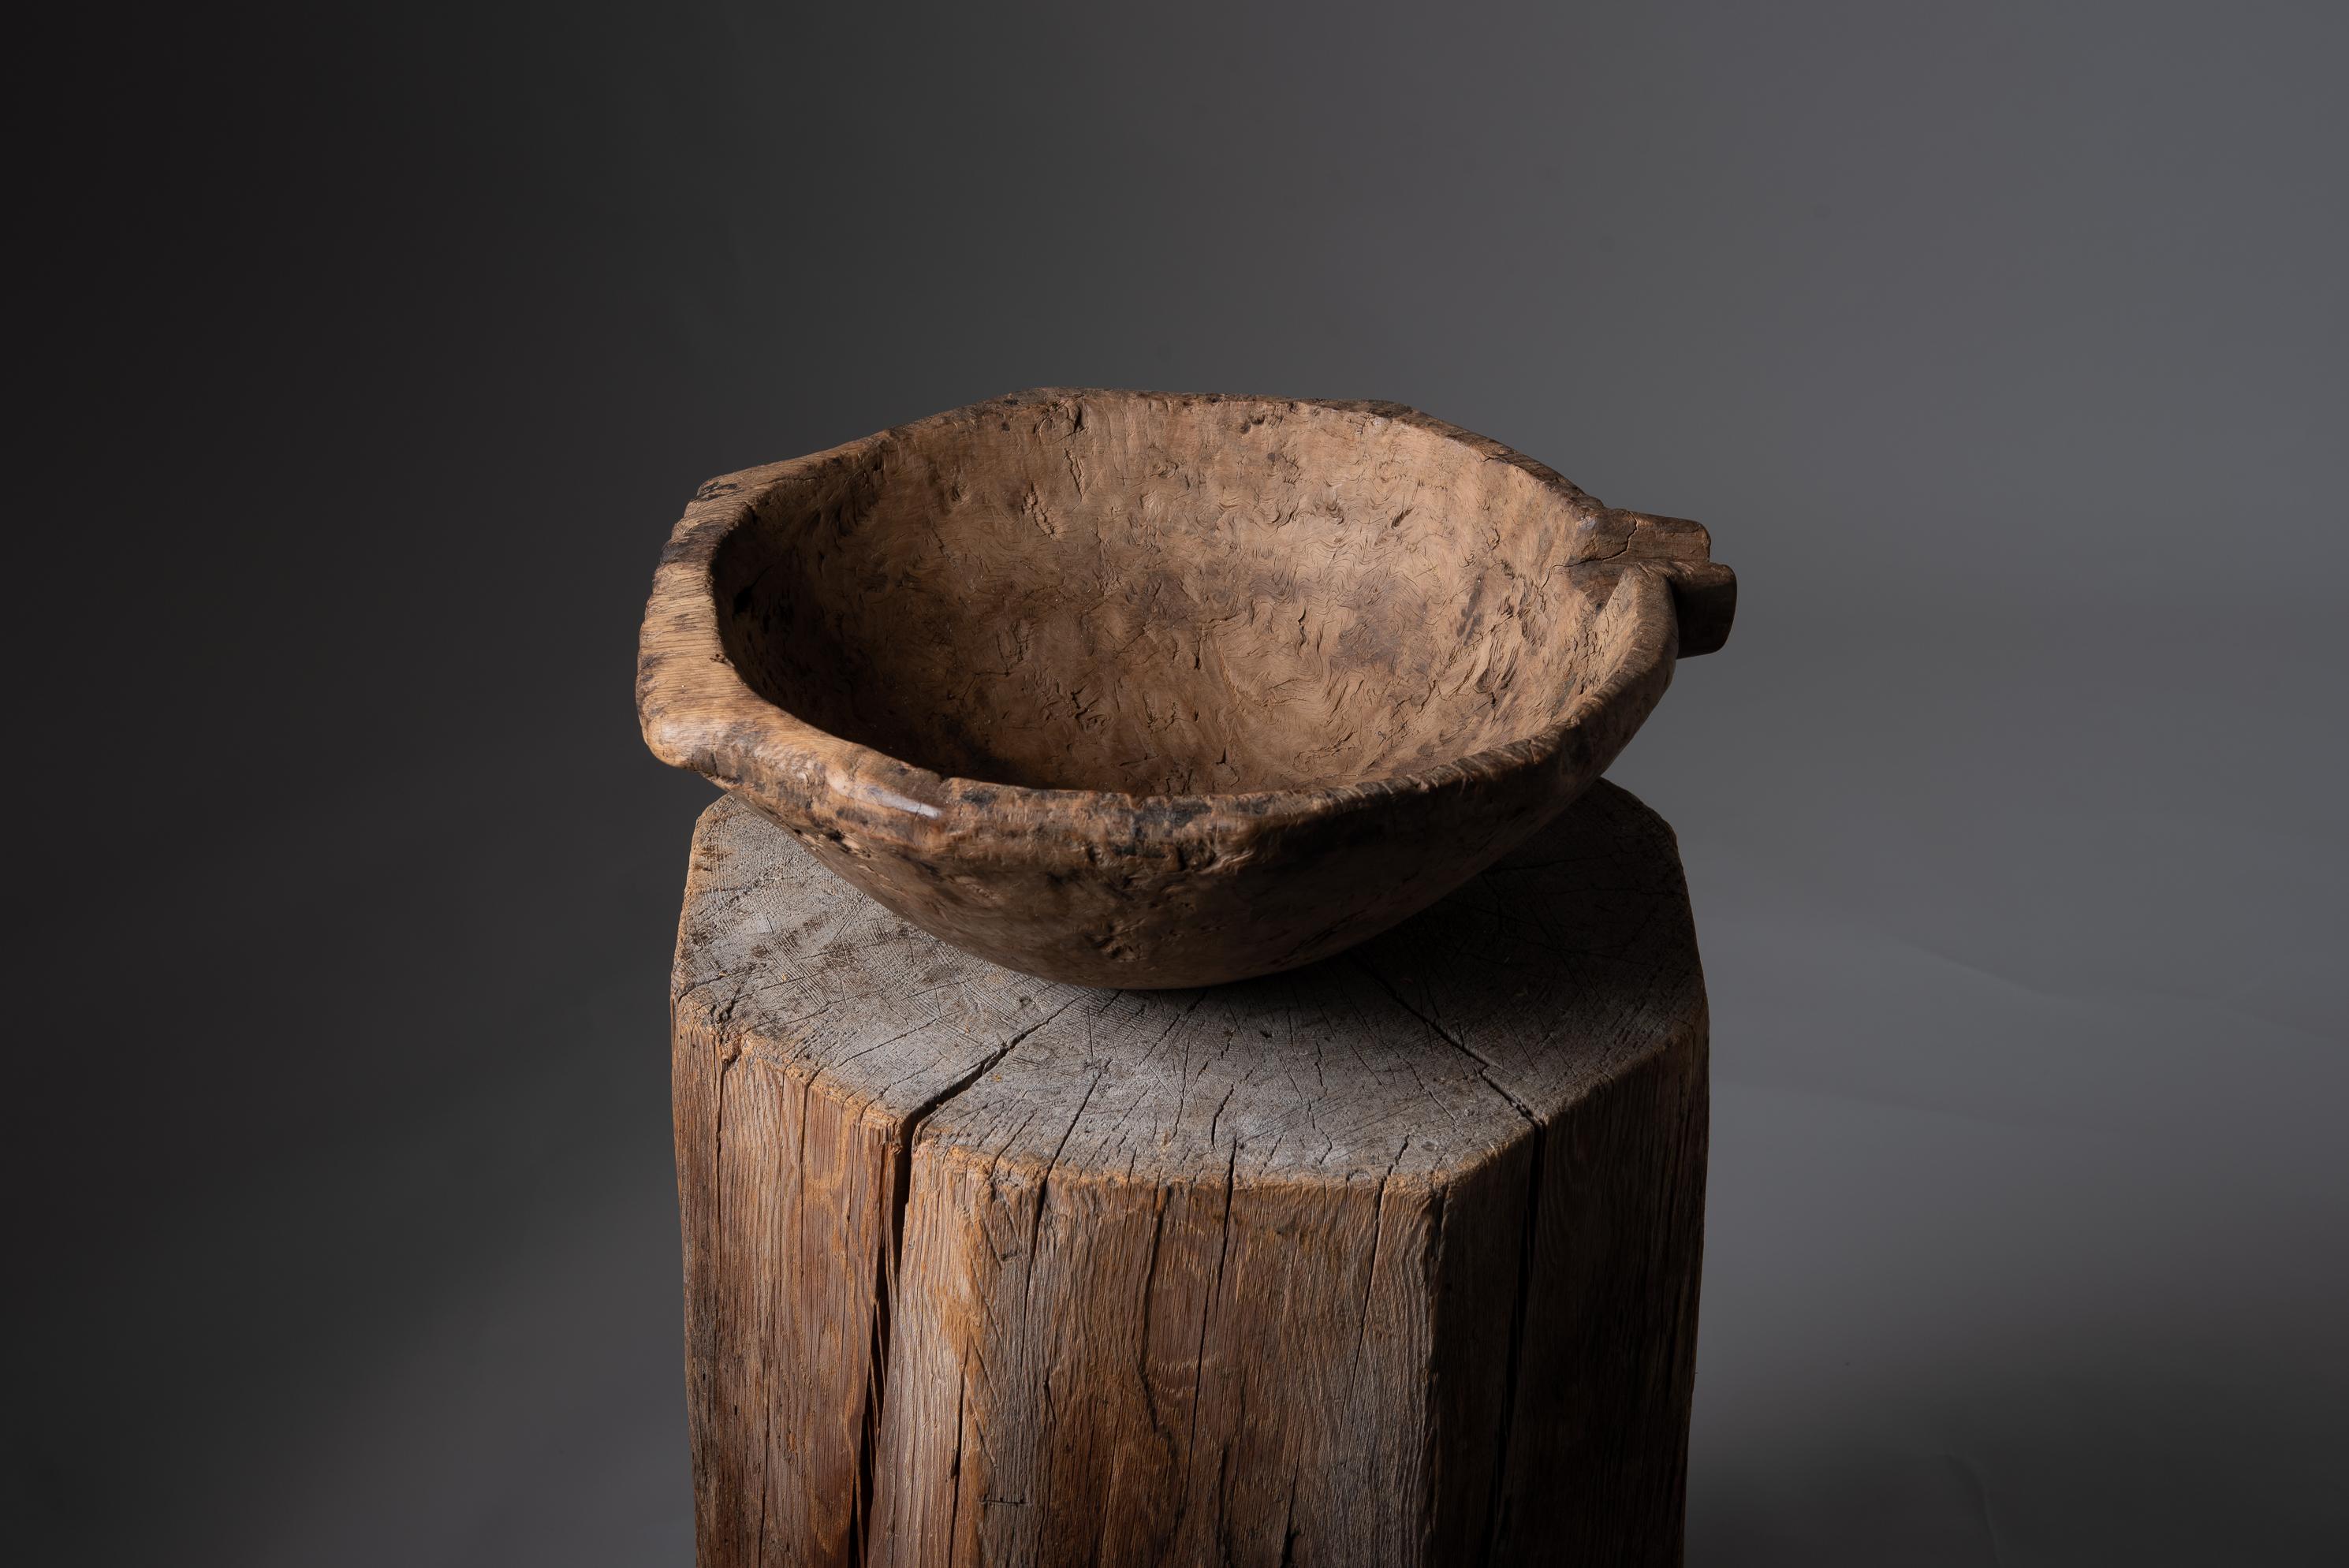 Swedish hand-made wood bowl from the first half of the 19th century. The bowl is from northern Sweden and has an unusual decorated handle on the side as well as a carved spout. The bowl is very rustic and has clear signs of time and use. As bowls